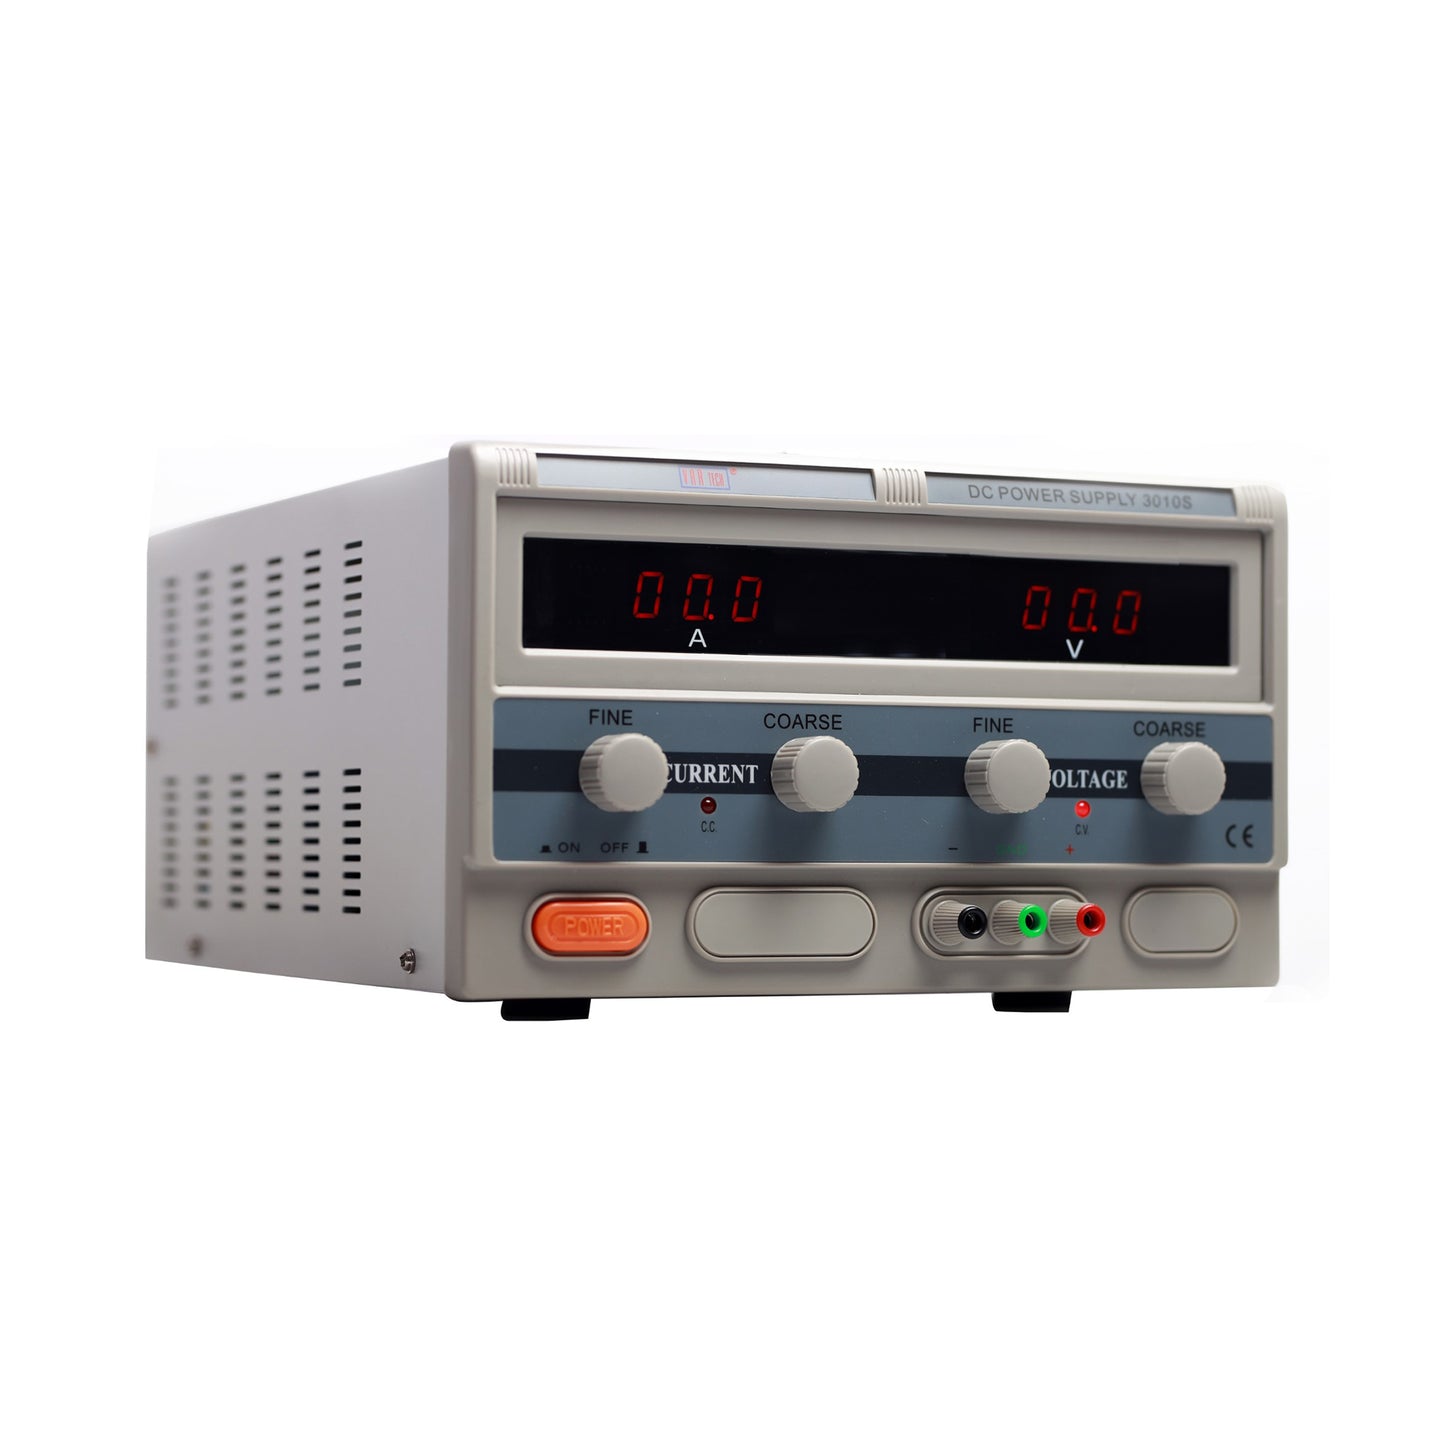 3010 S 30V 10A SMPS Based DC regulated power supply